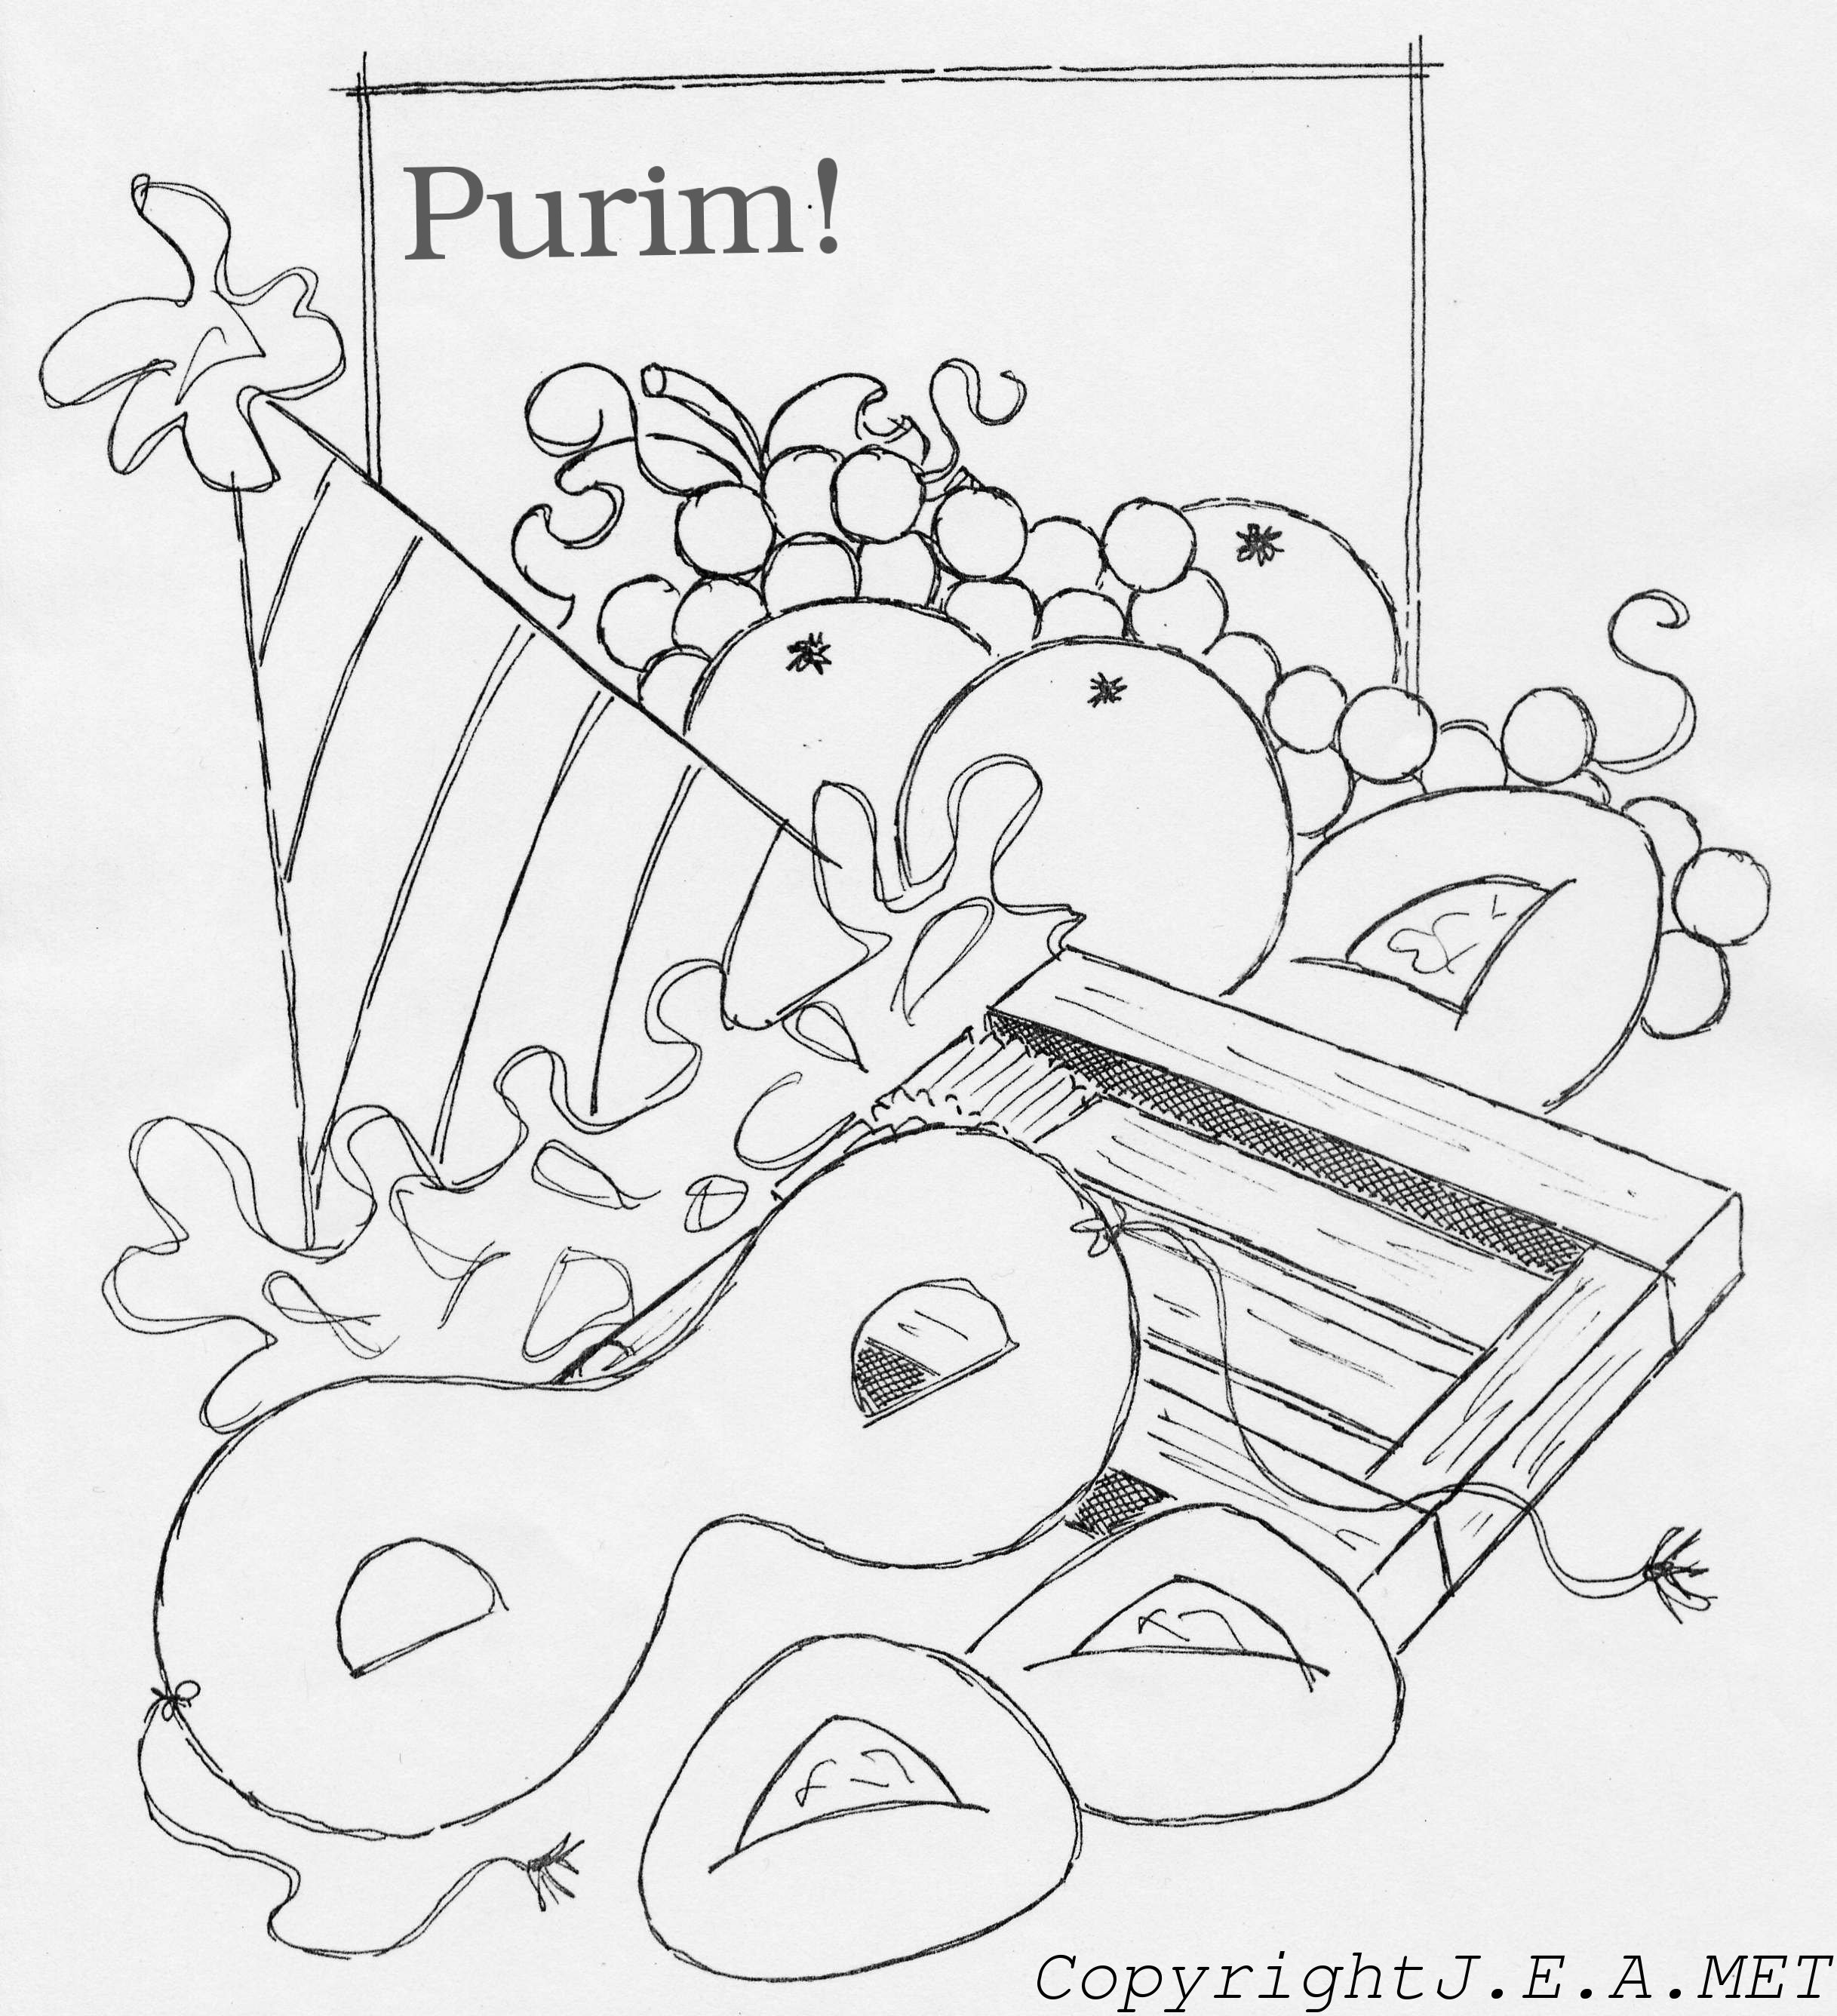 Purim coloring pages to download and print for free